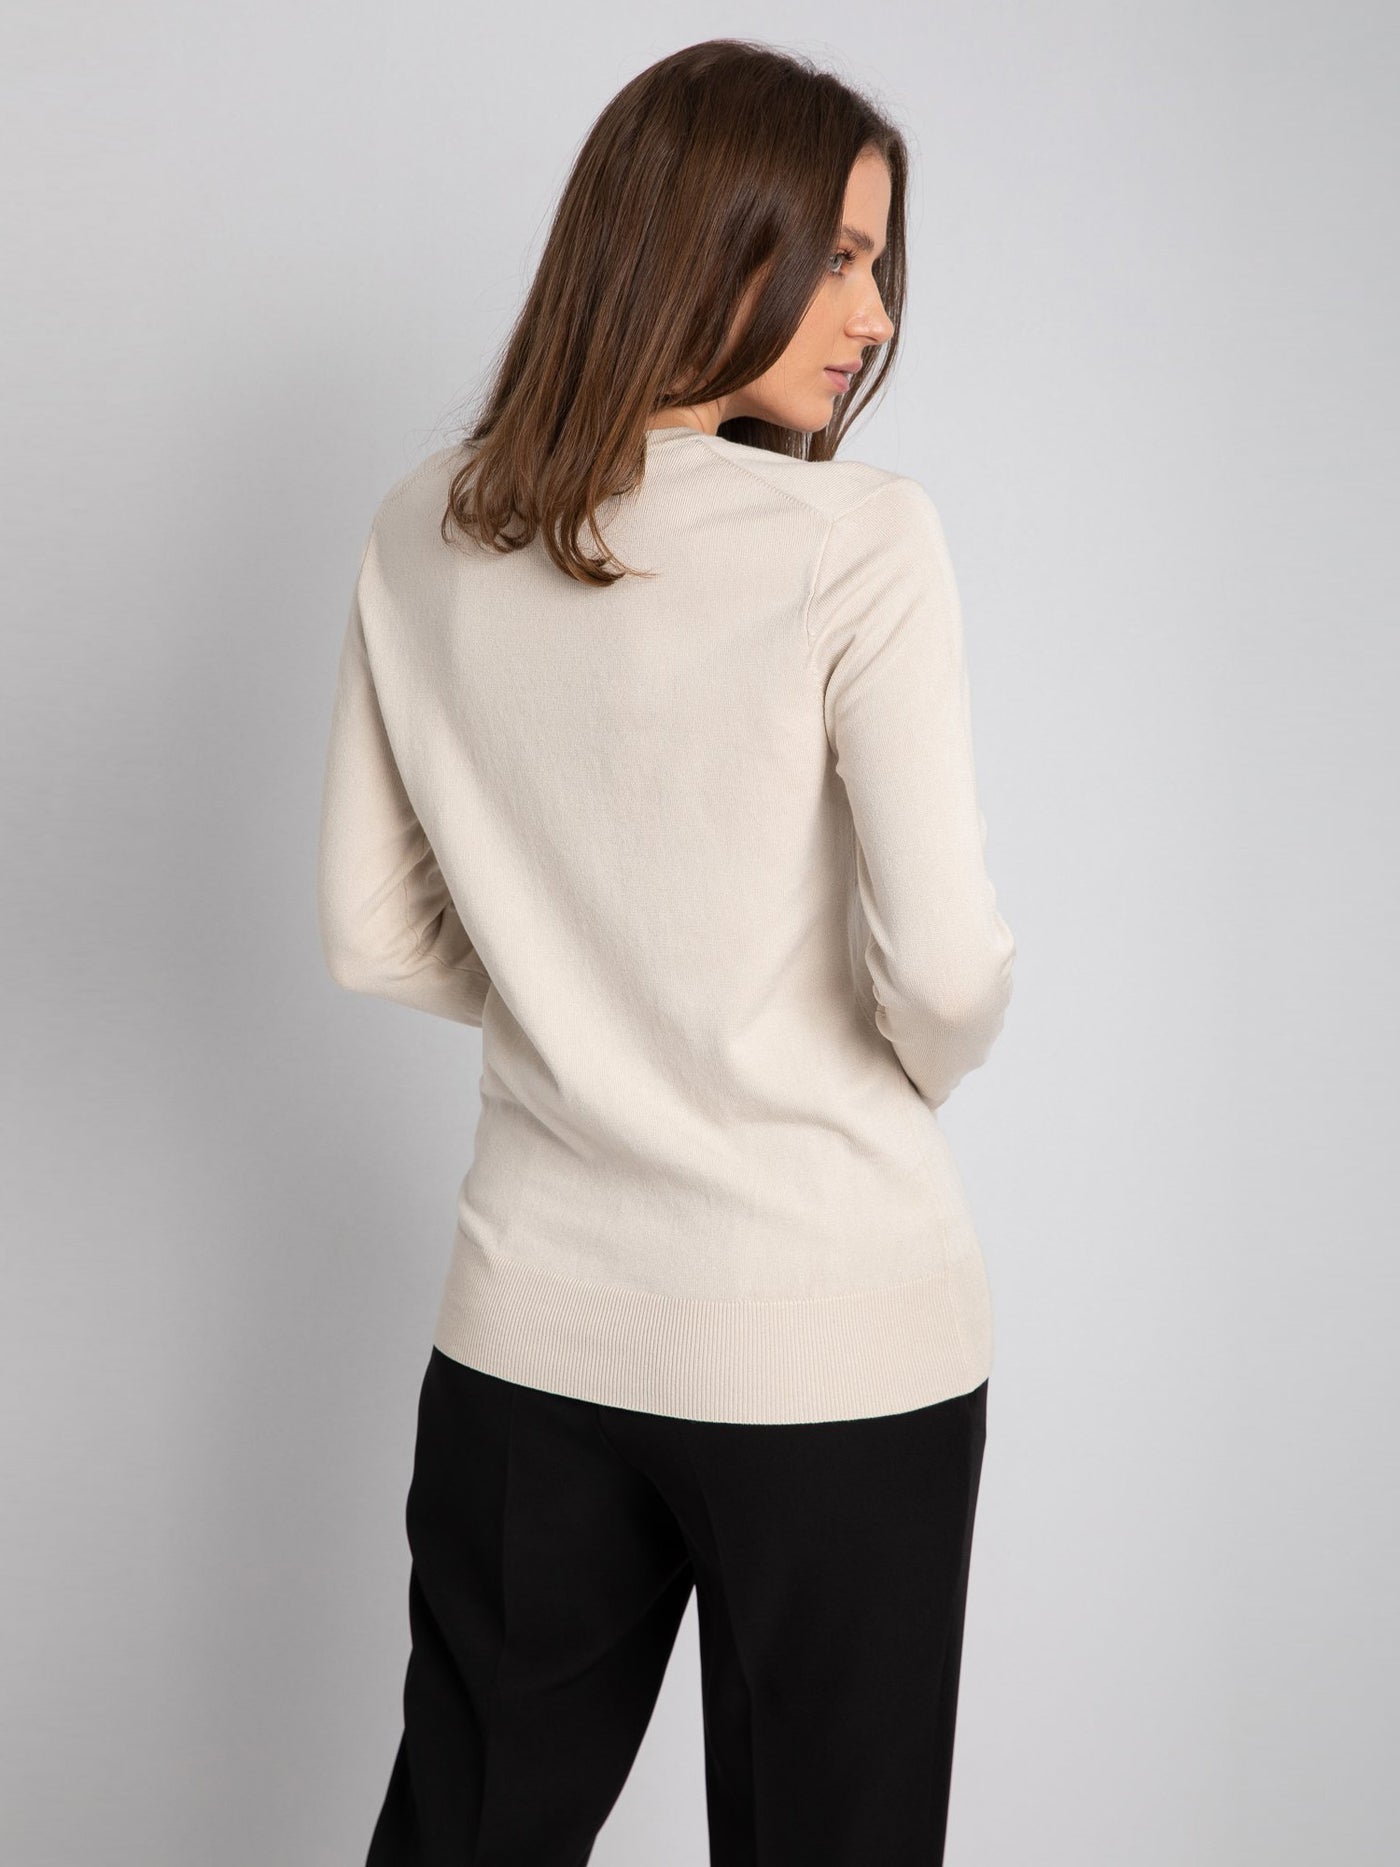 Top - Soft Knitted